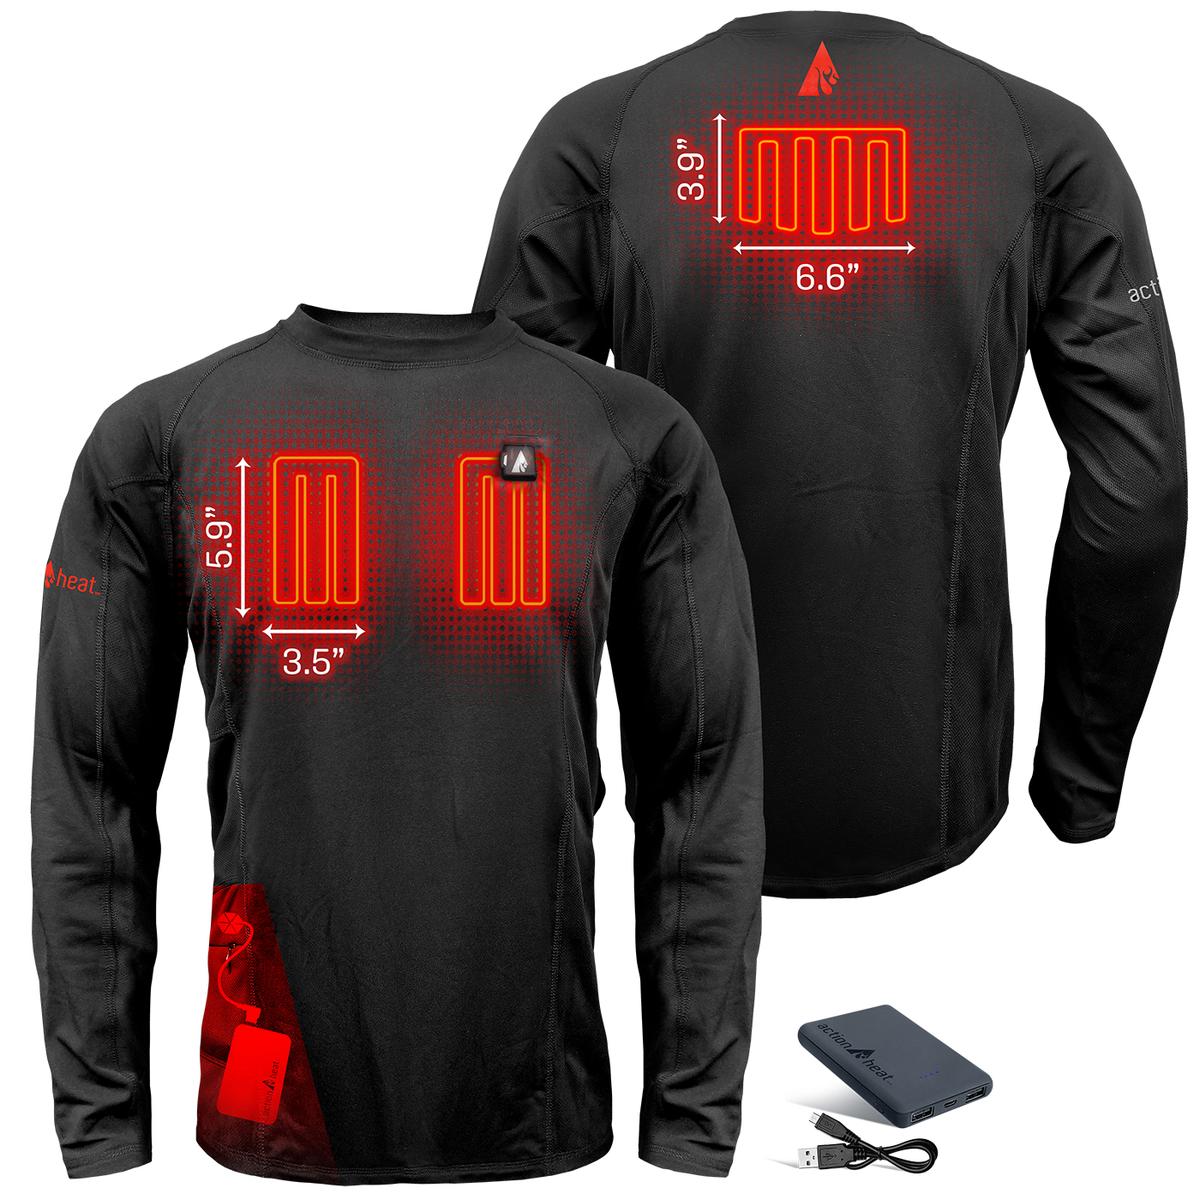 Best Deal for Heated Thermal Long Sleeve T Shirts APP Intelligent Control